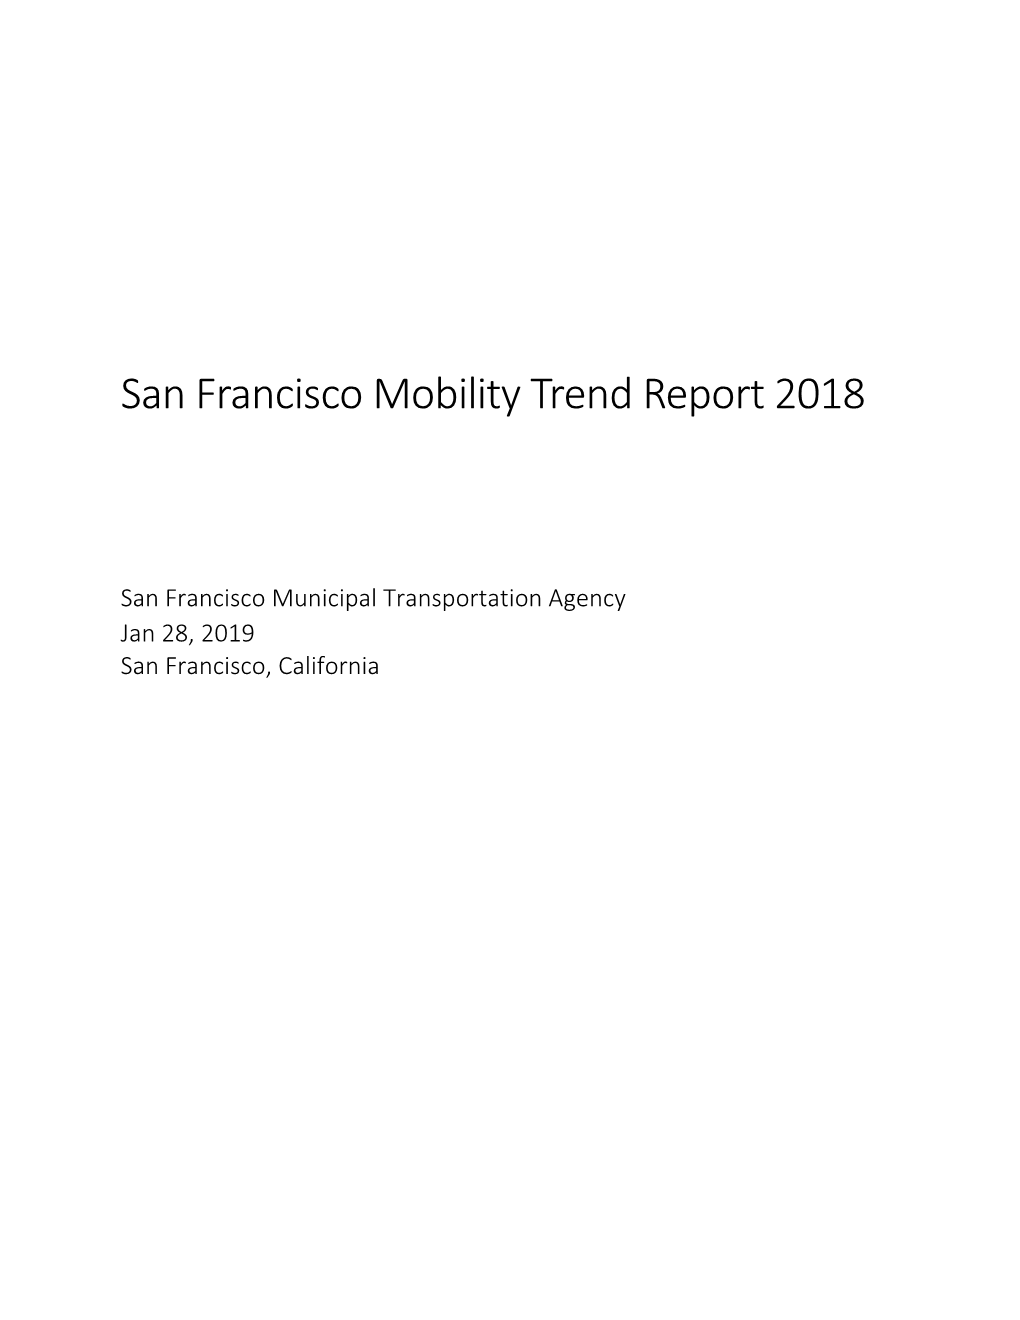 San Francisco Mobility Trend Report 2018